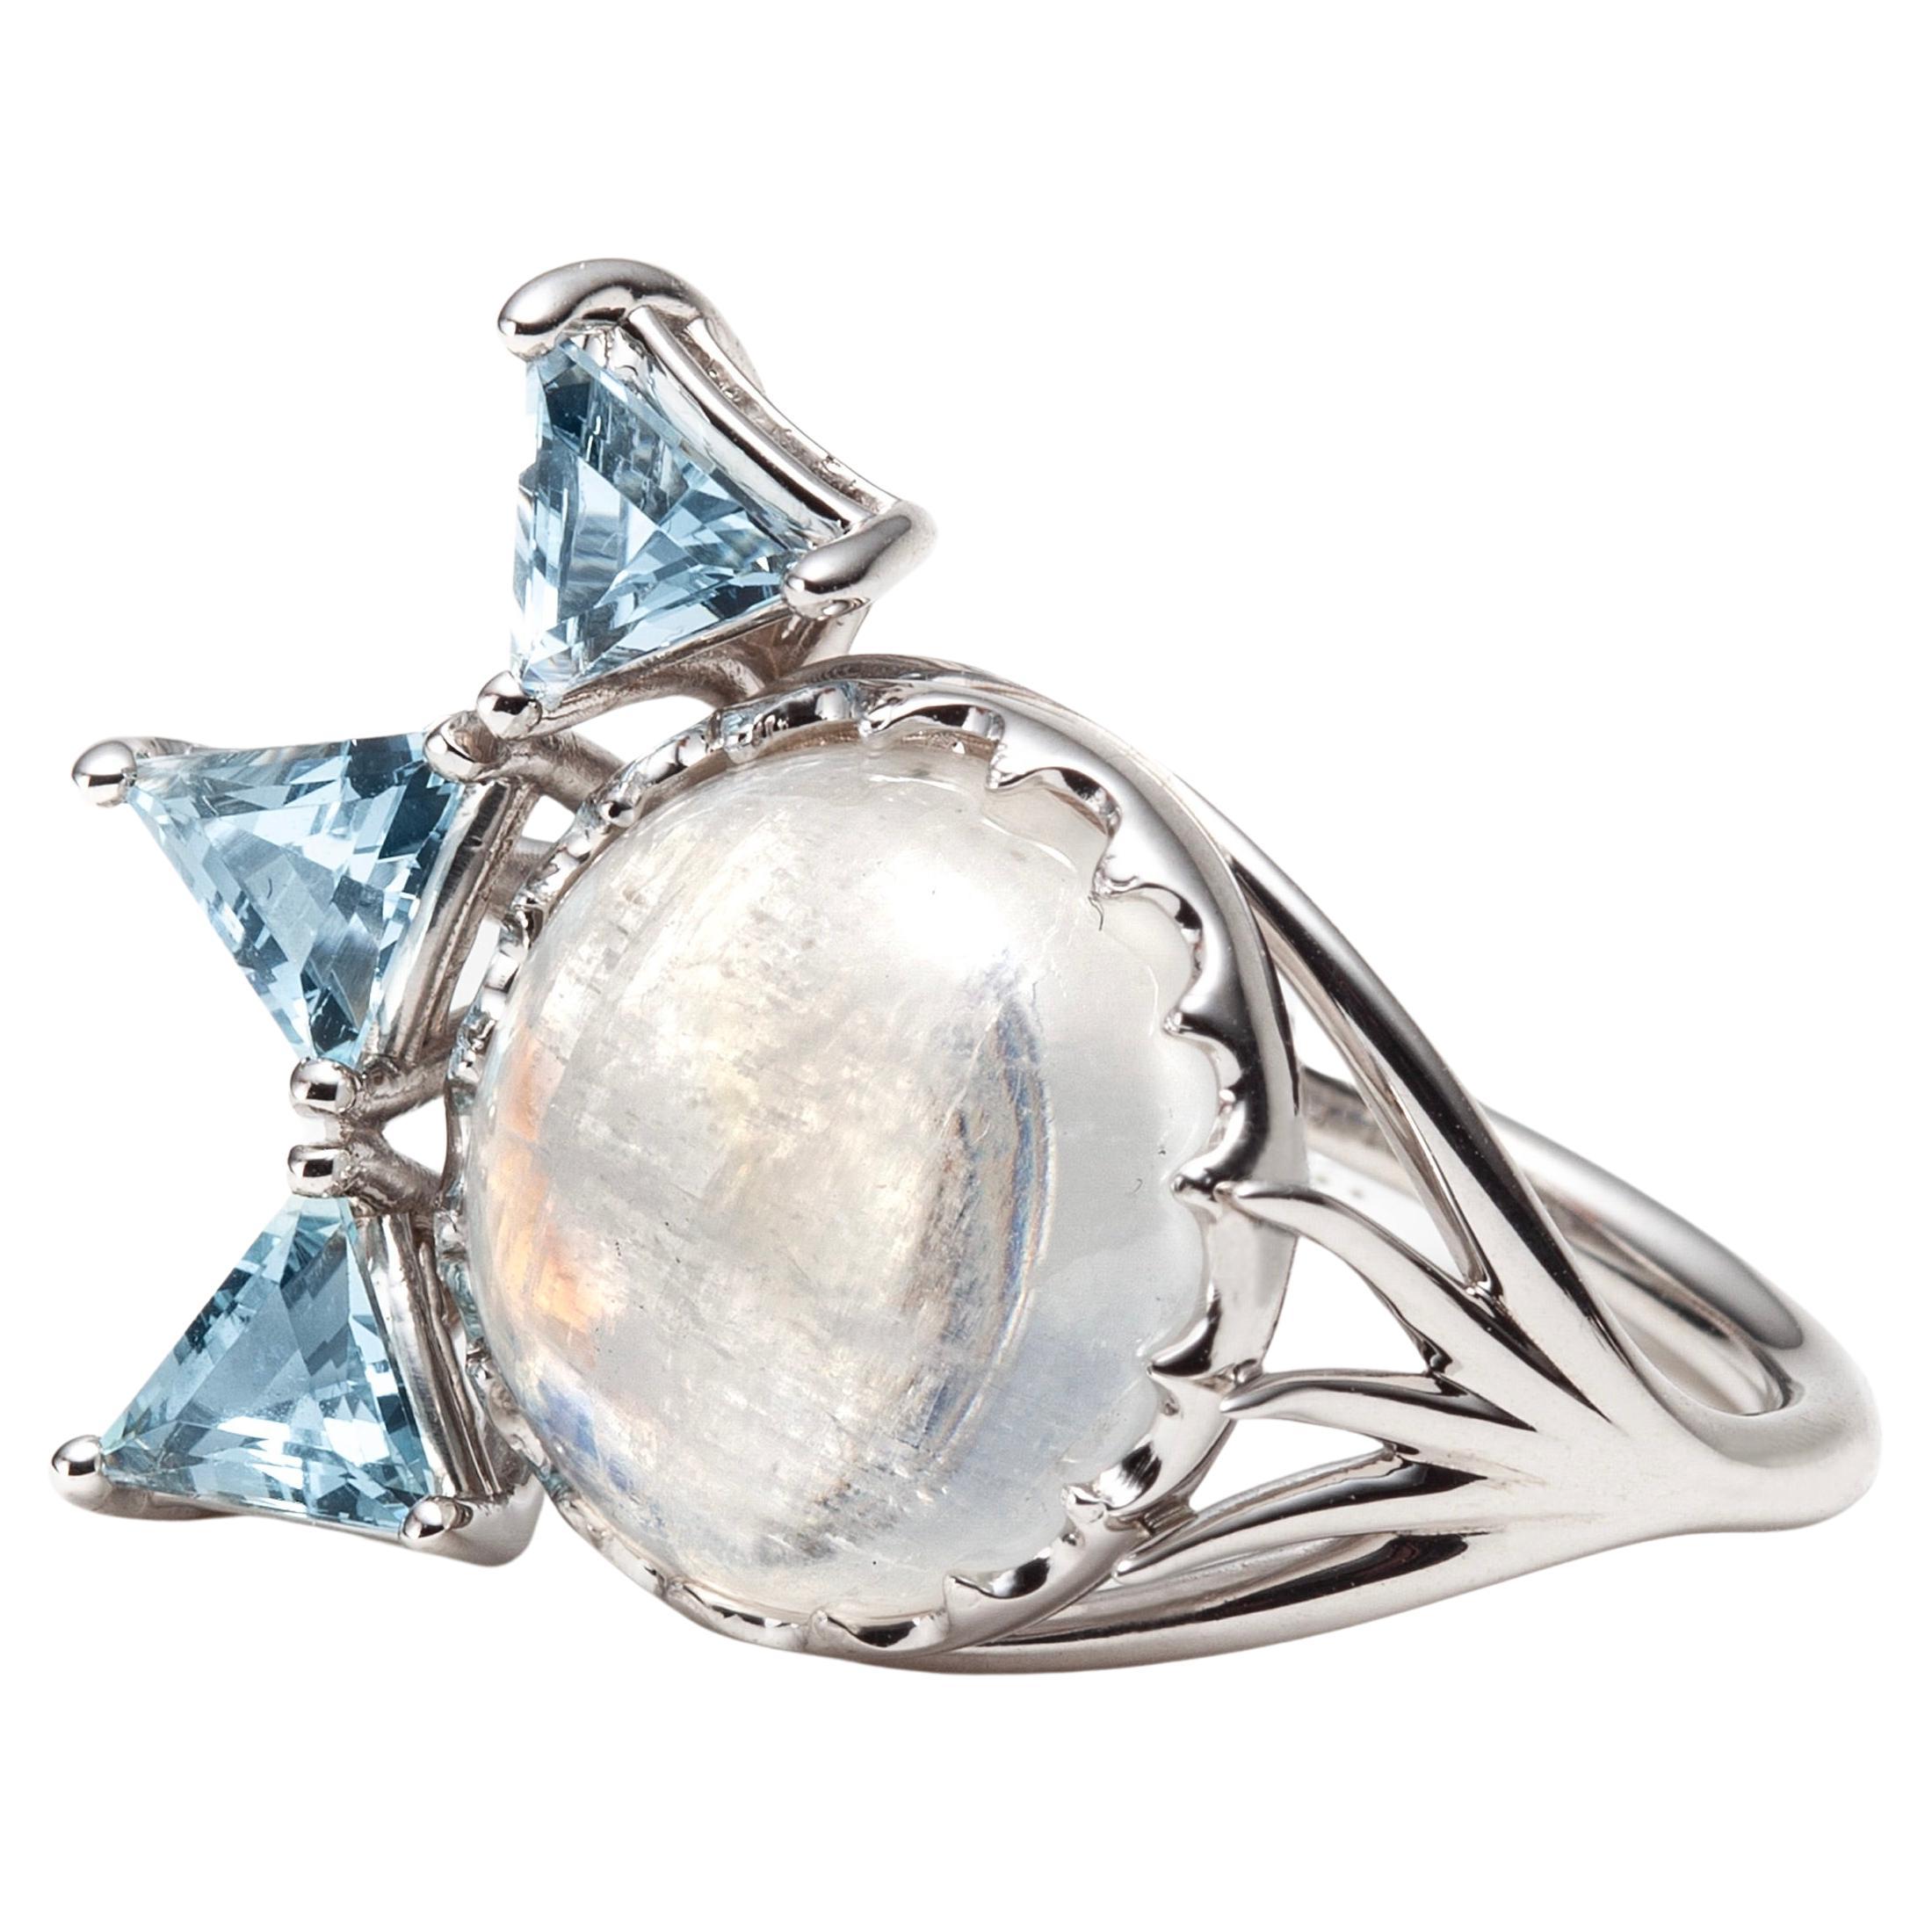 For Sale:  14k White Gold Ring set with a Moonstone Cabochon and Triangular Aquamarines